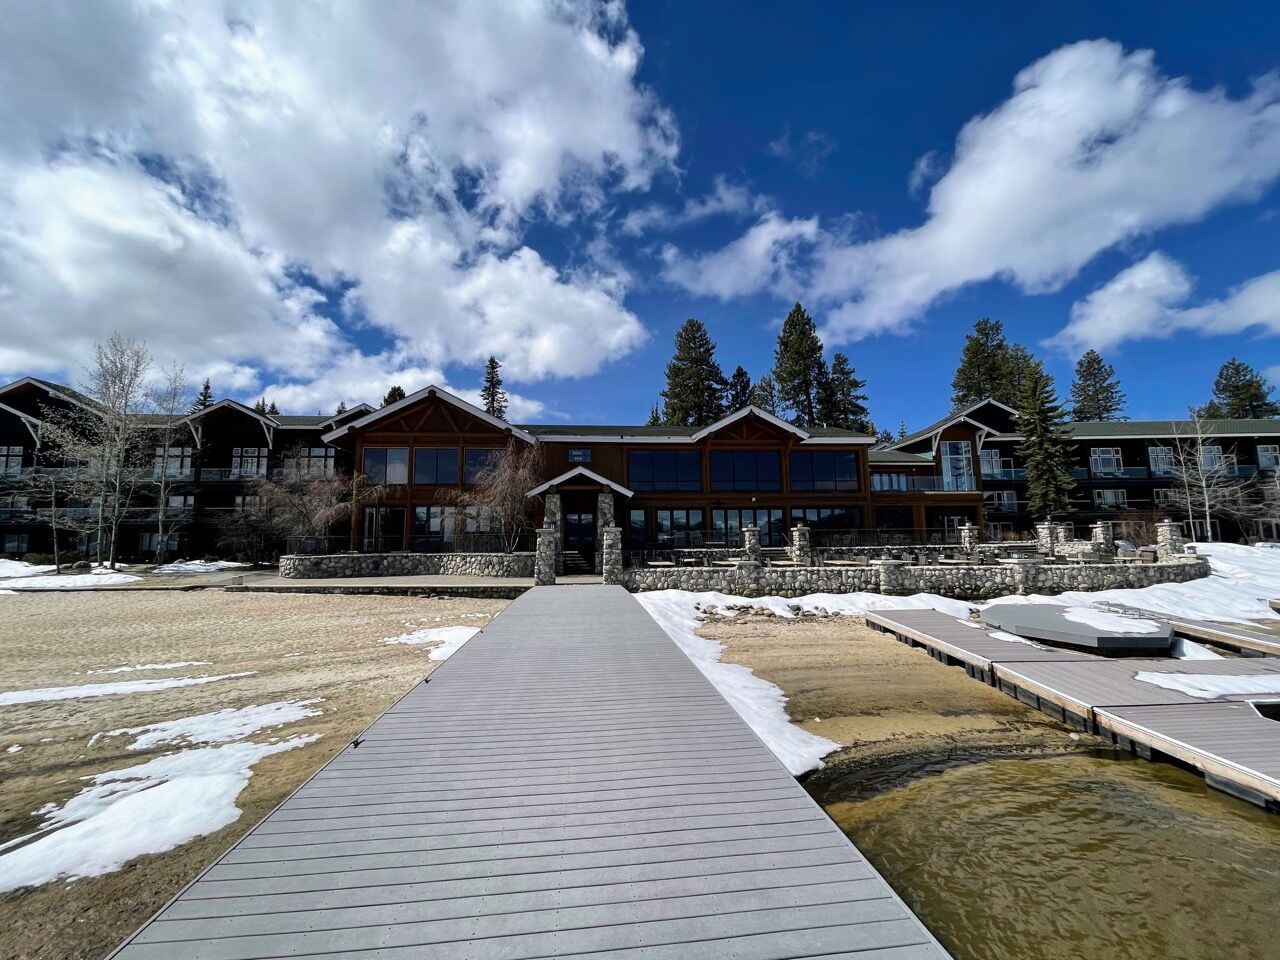 Upscale resort in McCall faces lawsuits over reports of sexual misconduct by employees, guest Local News idahopress